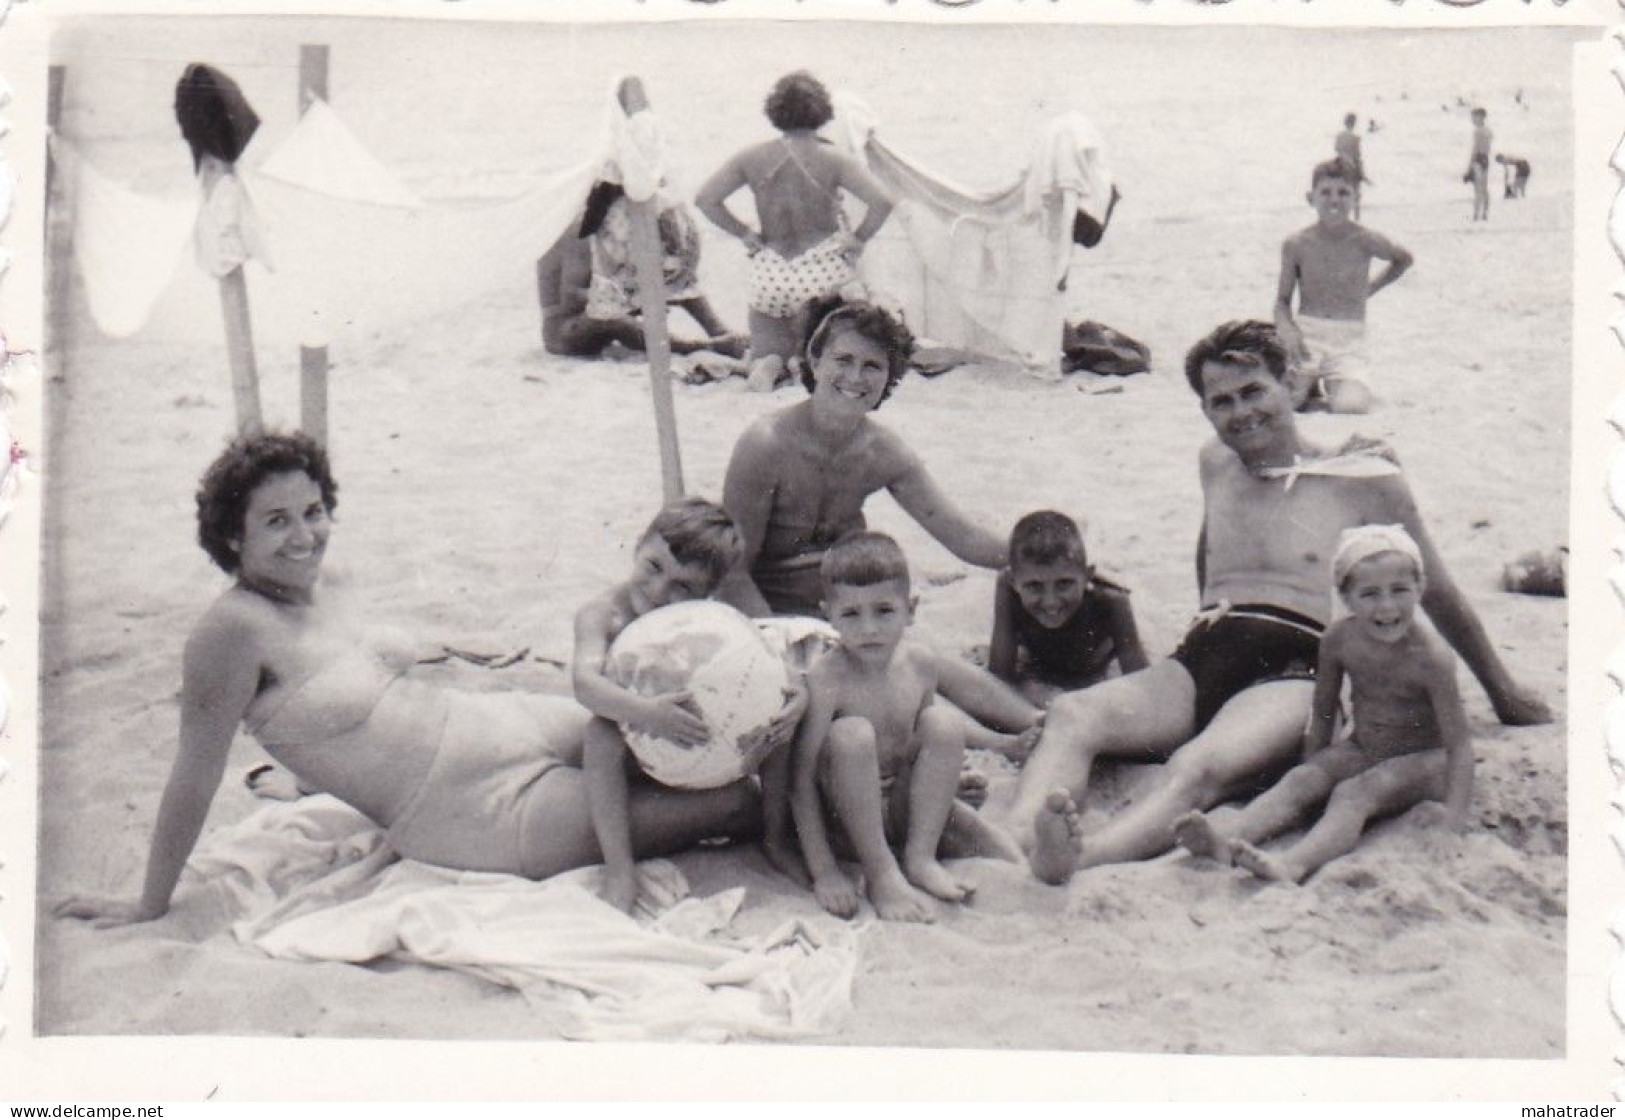 Old Real Original Photo - Naked Little Boys Man Women In Bikini On The Beach - Ca. 8.5x6 Cm - Anonymous Persons